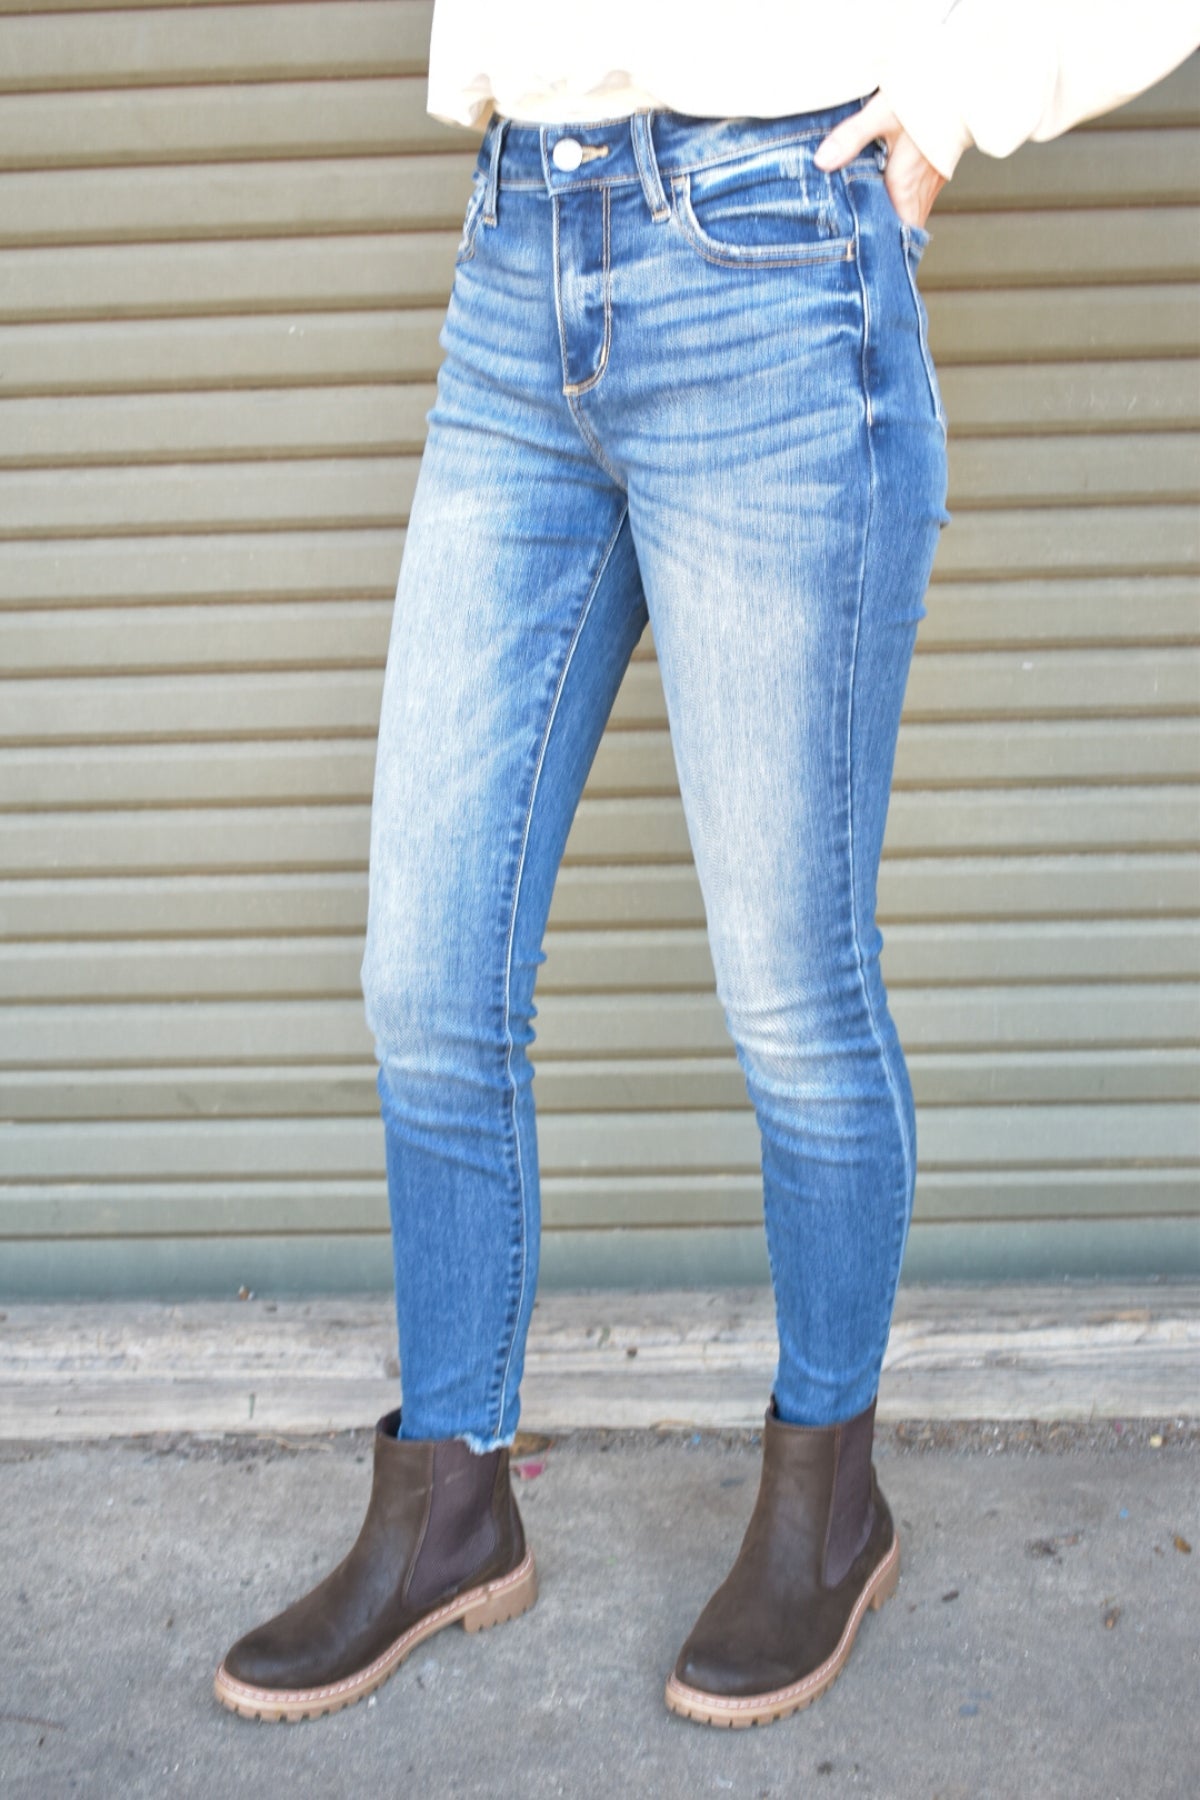 Cello: More Than Basic Skinny Jeans - Southern Grace Creations